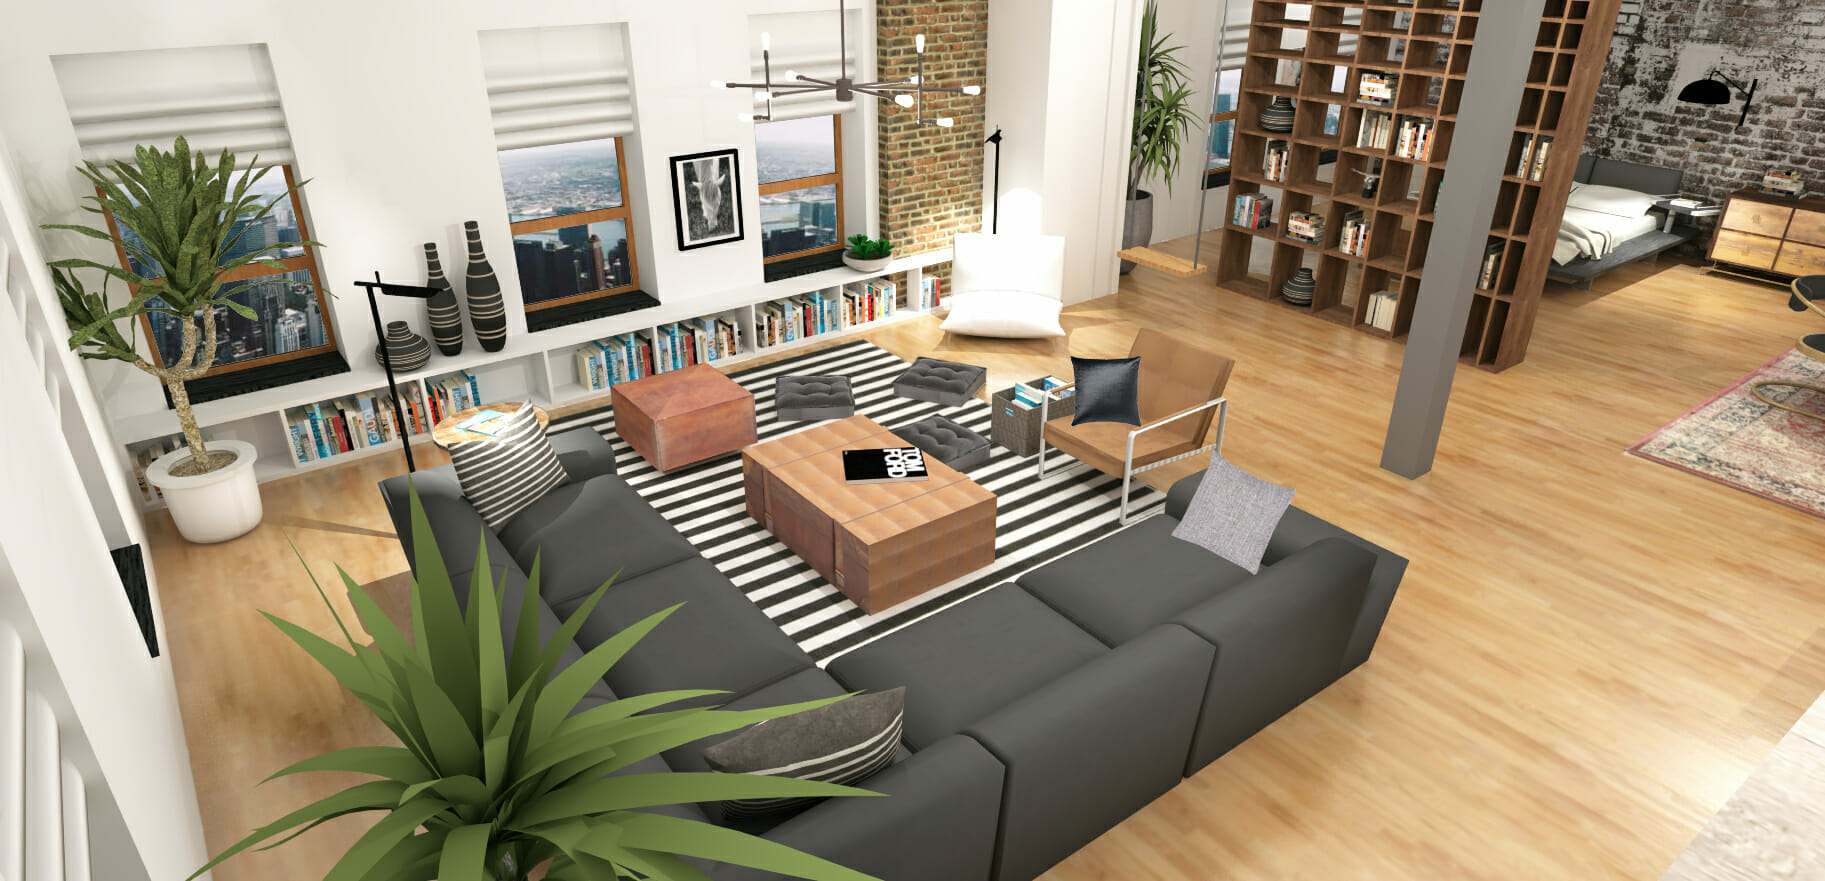 studio apartment layout ideas industrial style